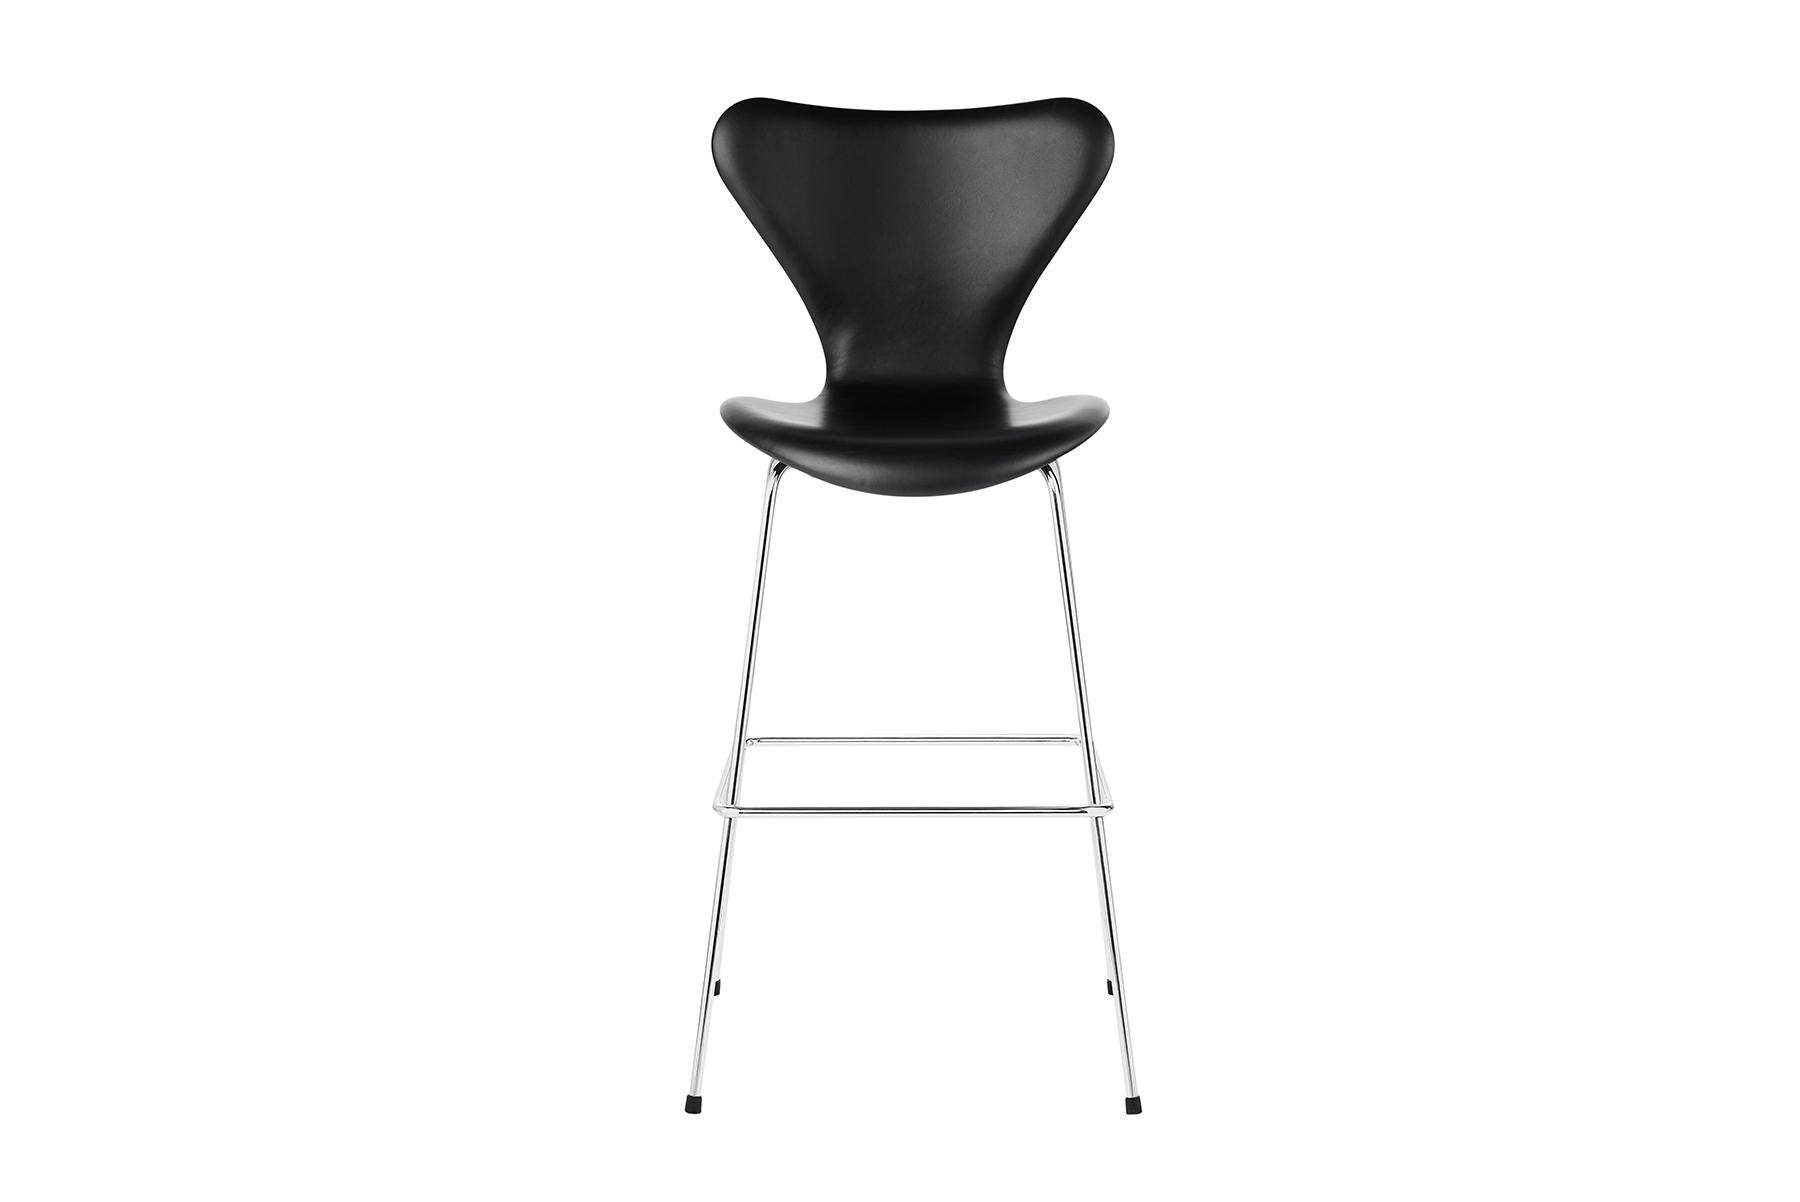 The Series 7™ barstool is a beautiful, functional and urban extension of the classic Series 7 chair designed by Arne Jacobsen in 1955. The chair is by far the most sold chair in the history of Fritz Hansen and perhaps also in furniture history. The